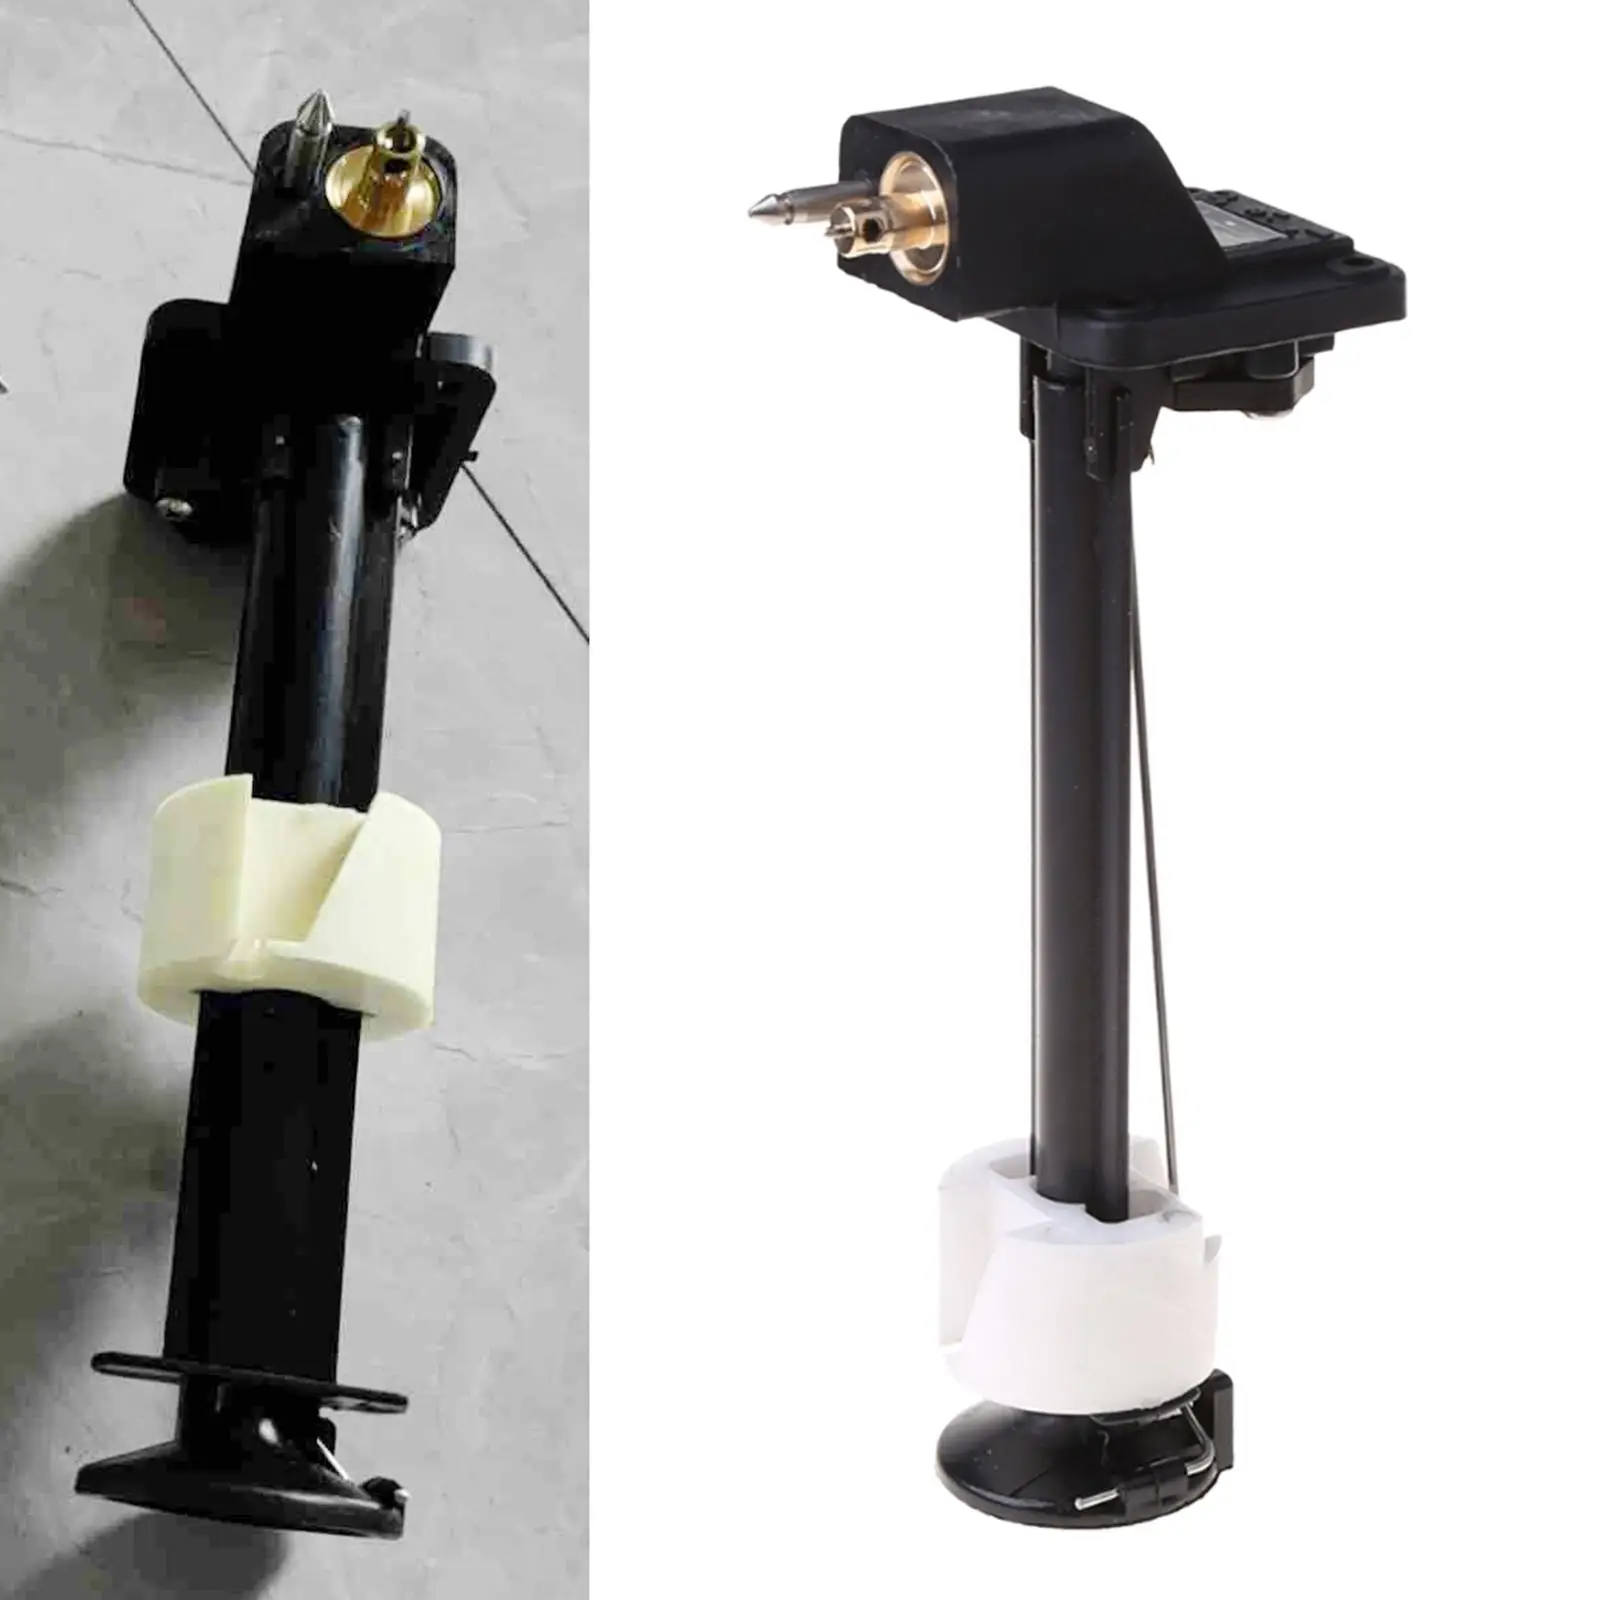 Fuel  Fuel Meter Assy Wear-Resistant Durable Outboard Engine Stable Assy Outboard  Tank for  for  Supplies